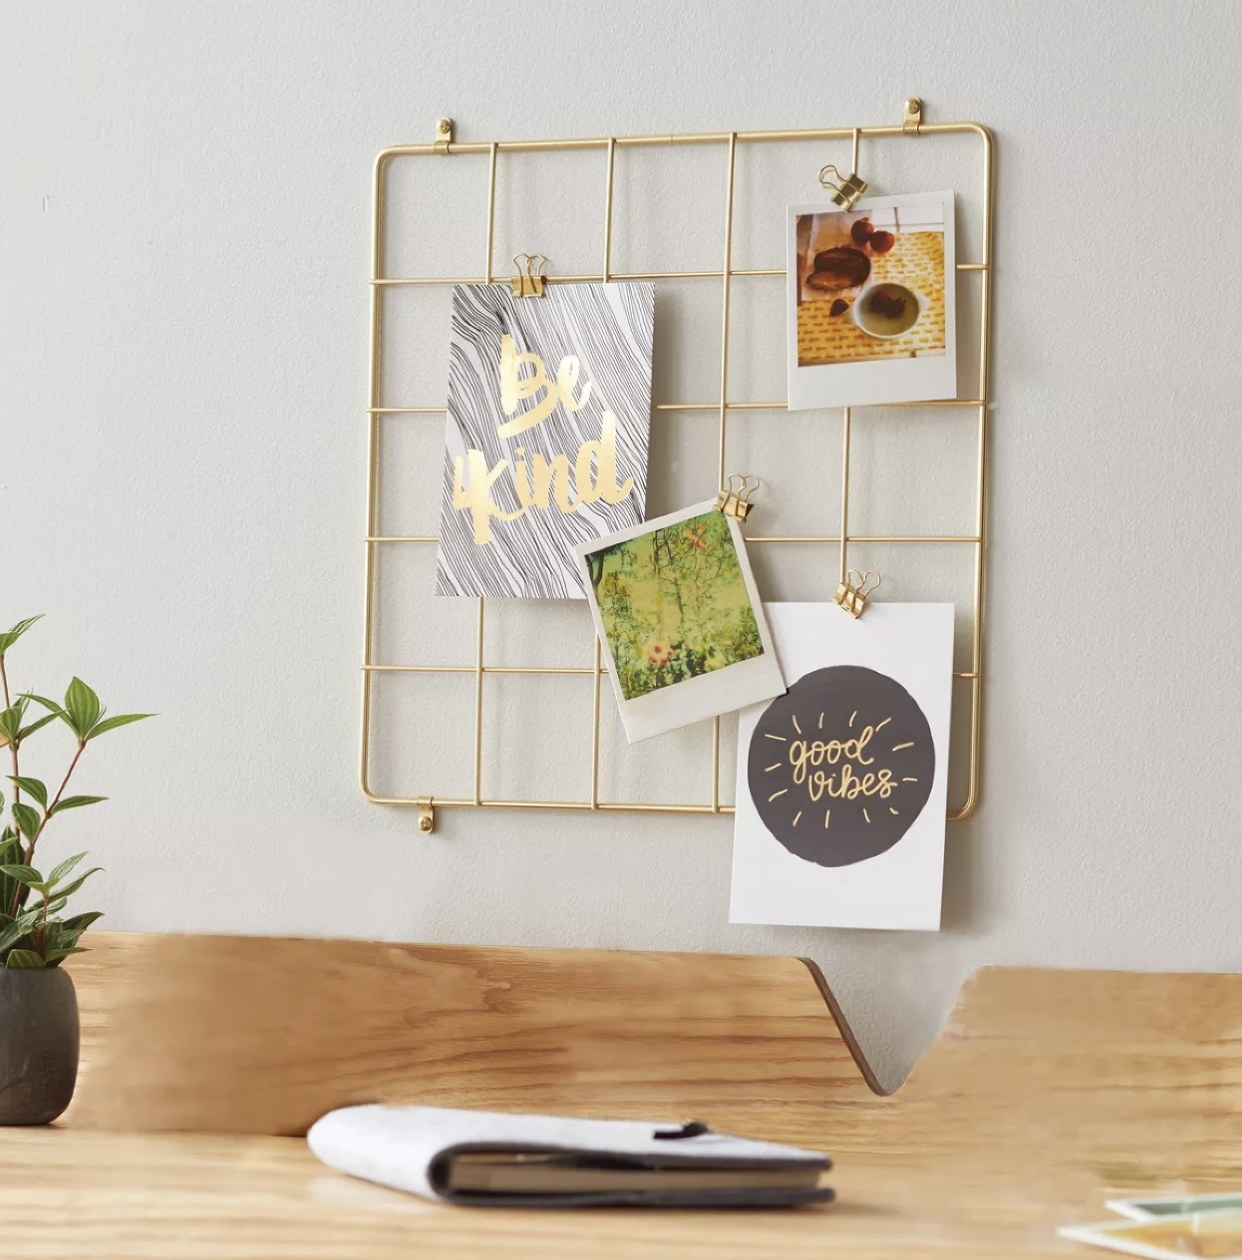 Organizer located on a desk wall featuring greeting cards and photos displayed